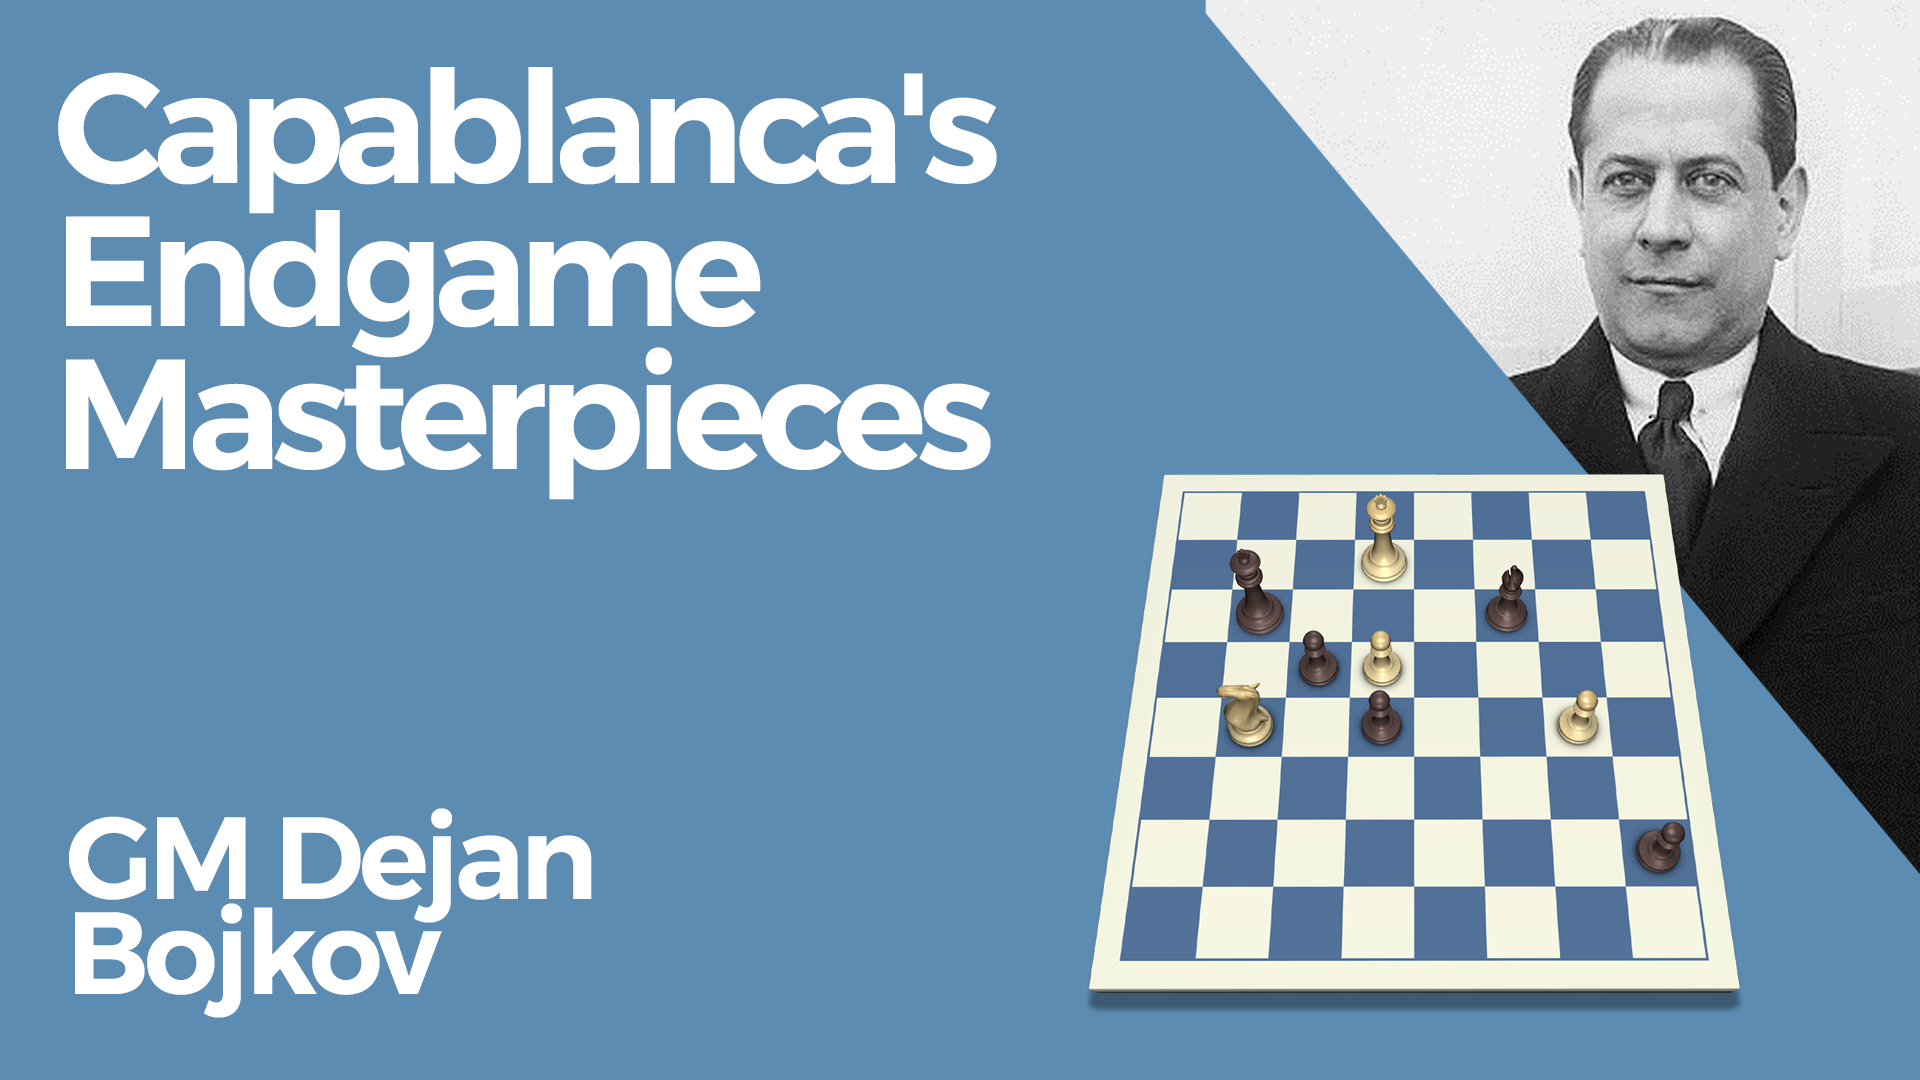 Timeless Chess Lesson by Capablanca 